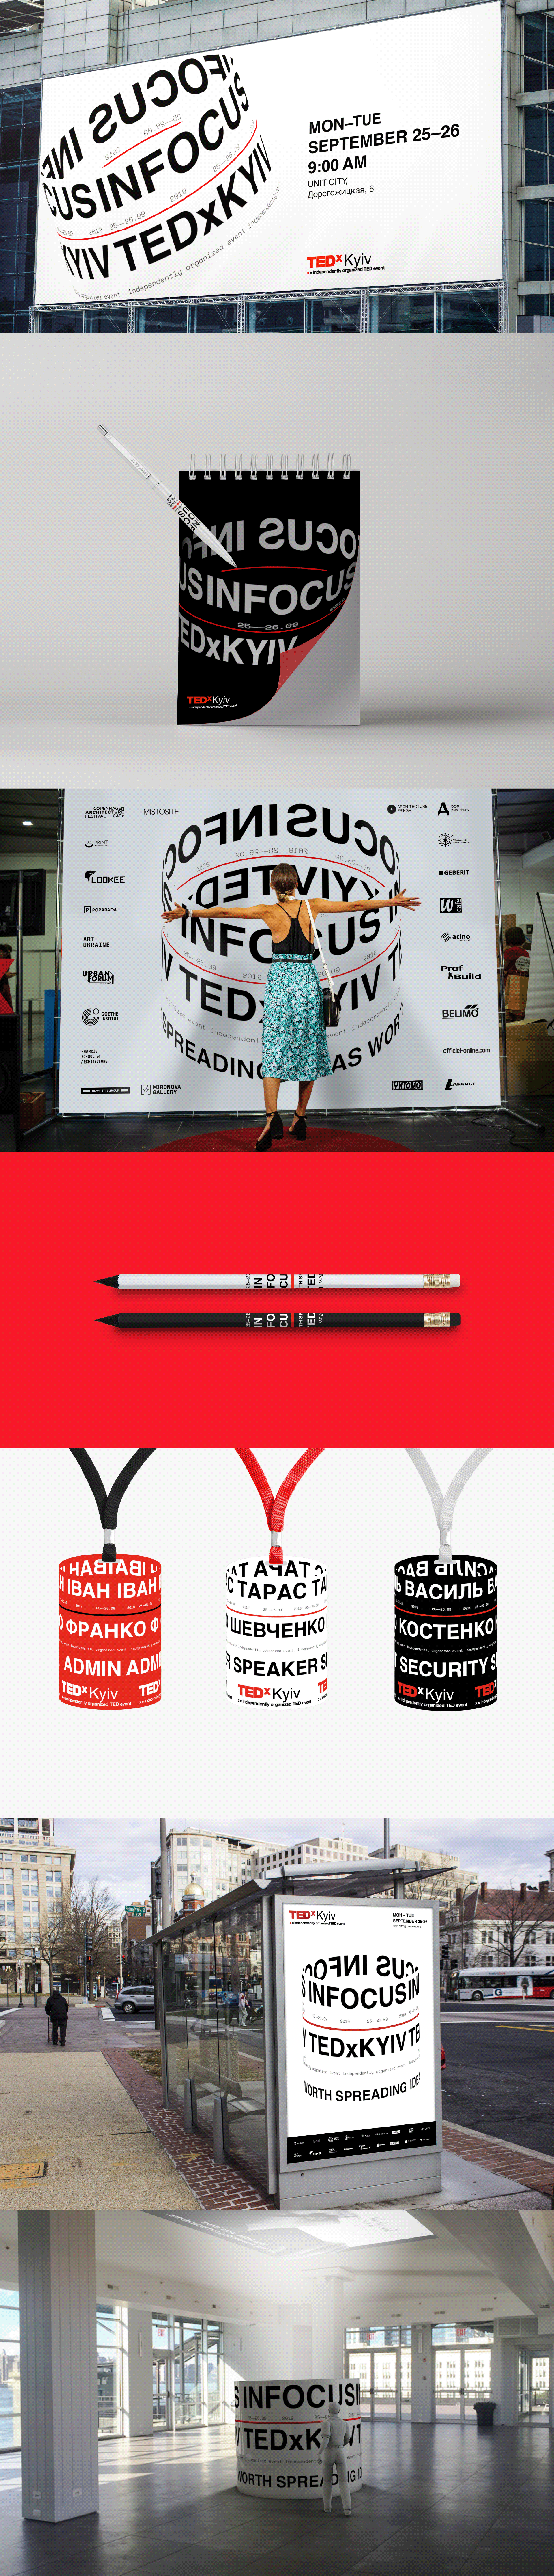 TEDx Kyiv Conference Identity on Behance7ea35288606729.5ddbcb5fc1627.png